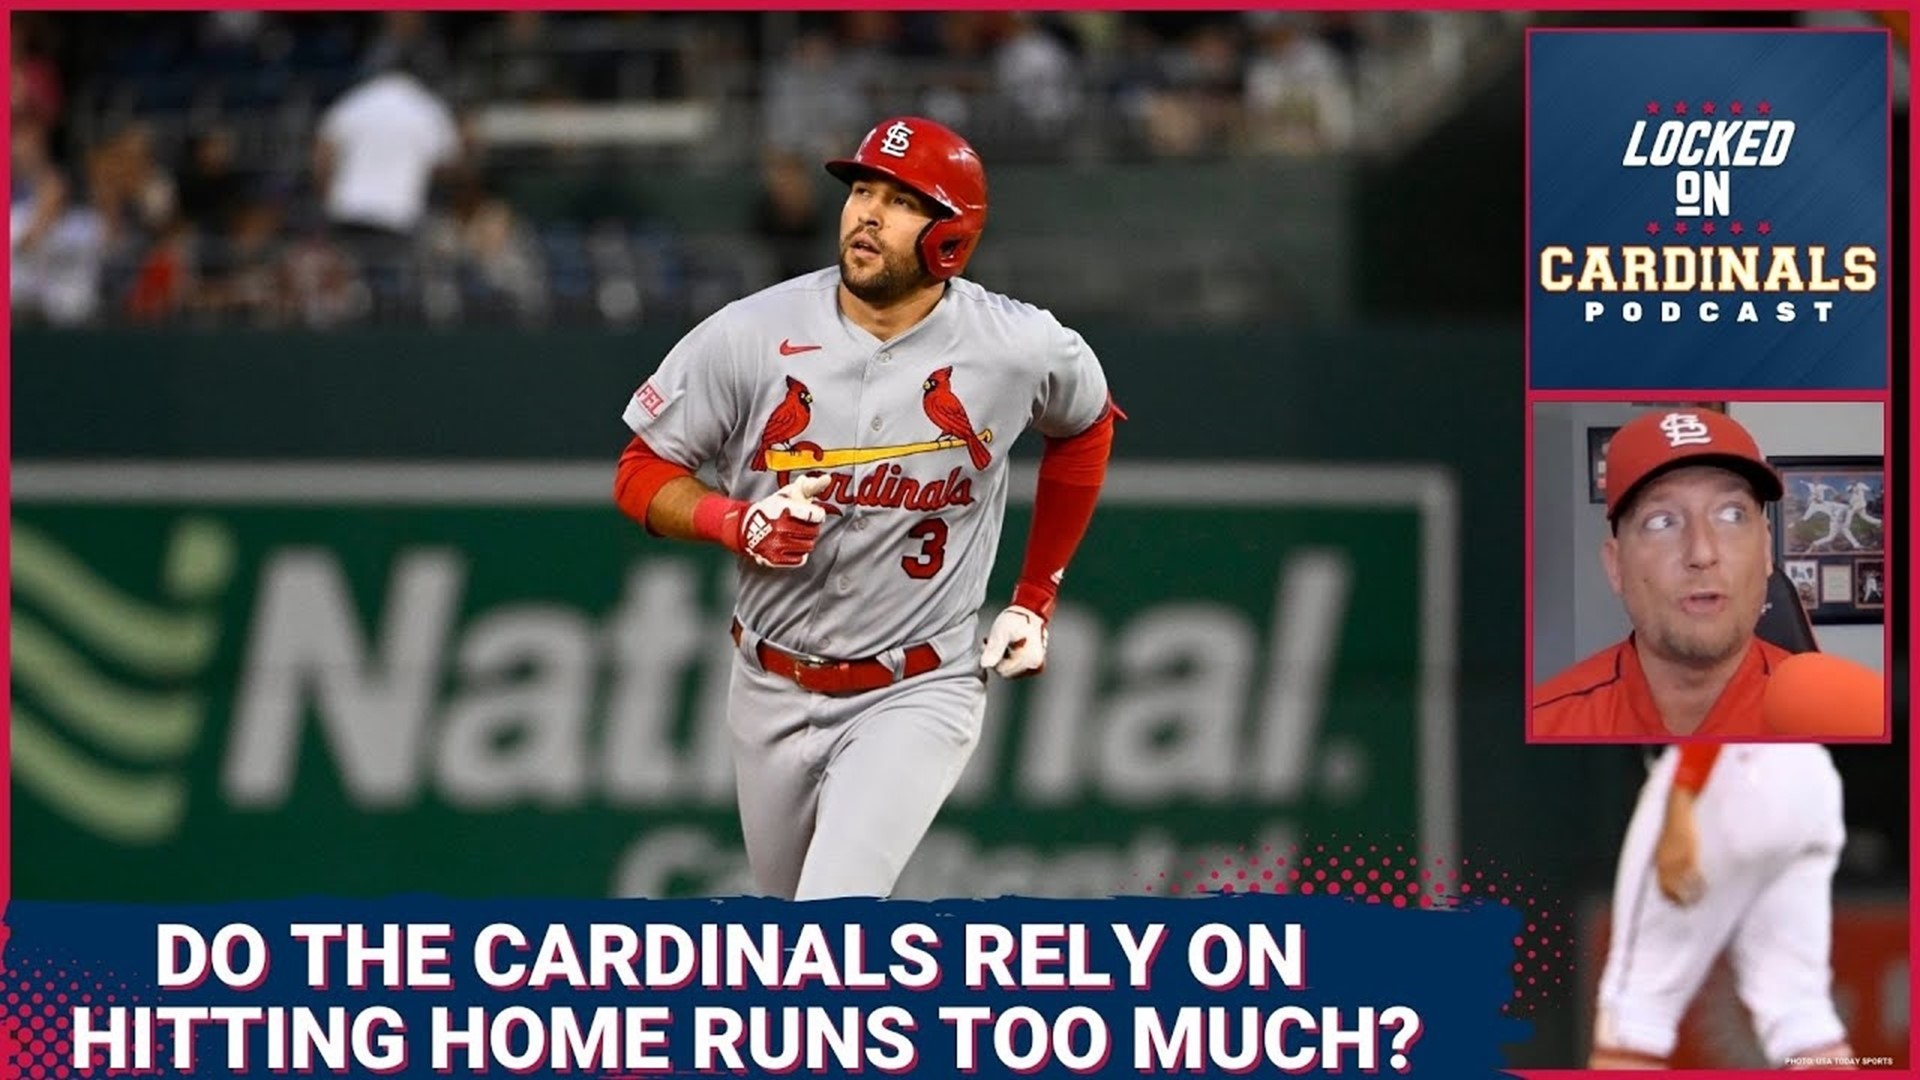 The St. Louis Cardinals Get Shut Out In D.C., Does The Team Rely On Home Runs Too Much?